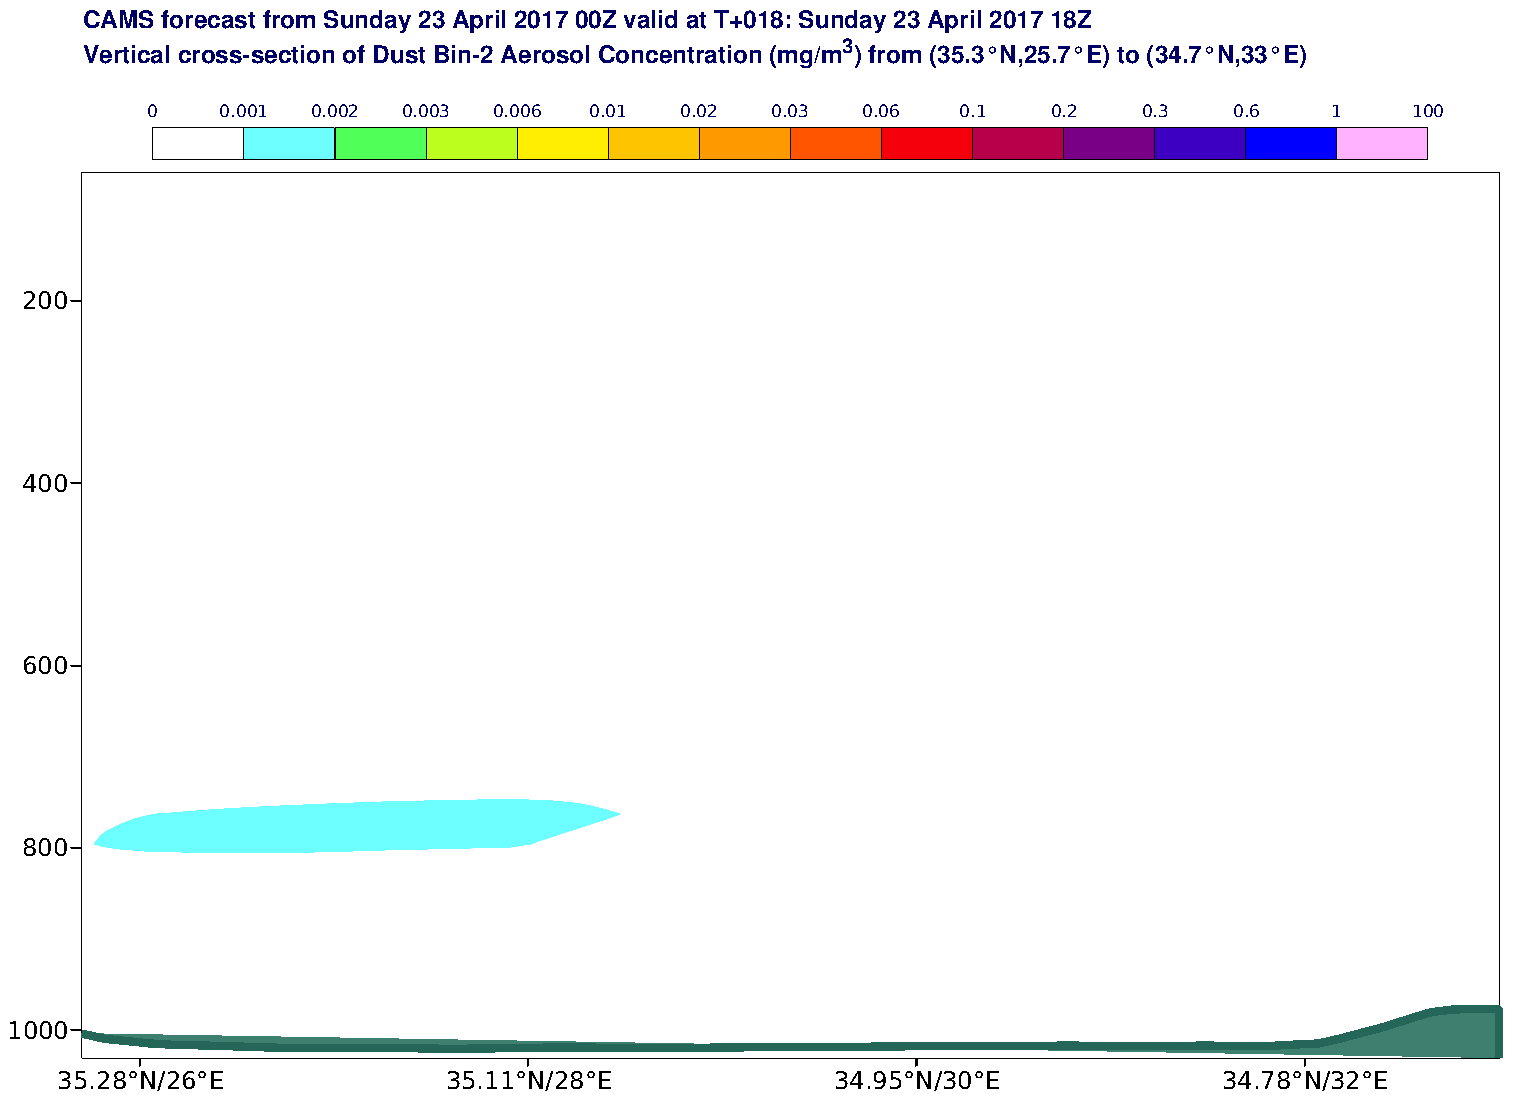 Vertical cross-section of Dust Bin-2 Aerosol Concentration (mg/m3) valid at T18 - 2017-04-23 18:00